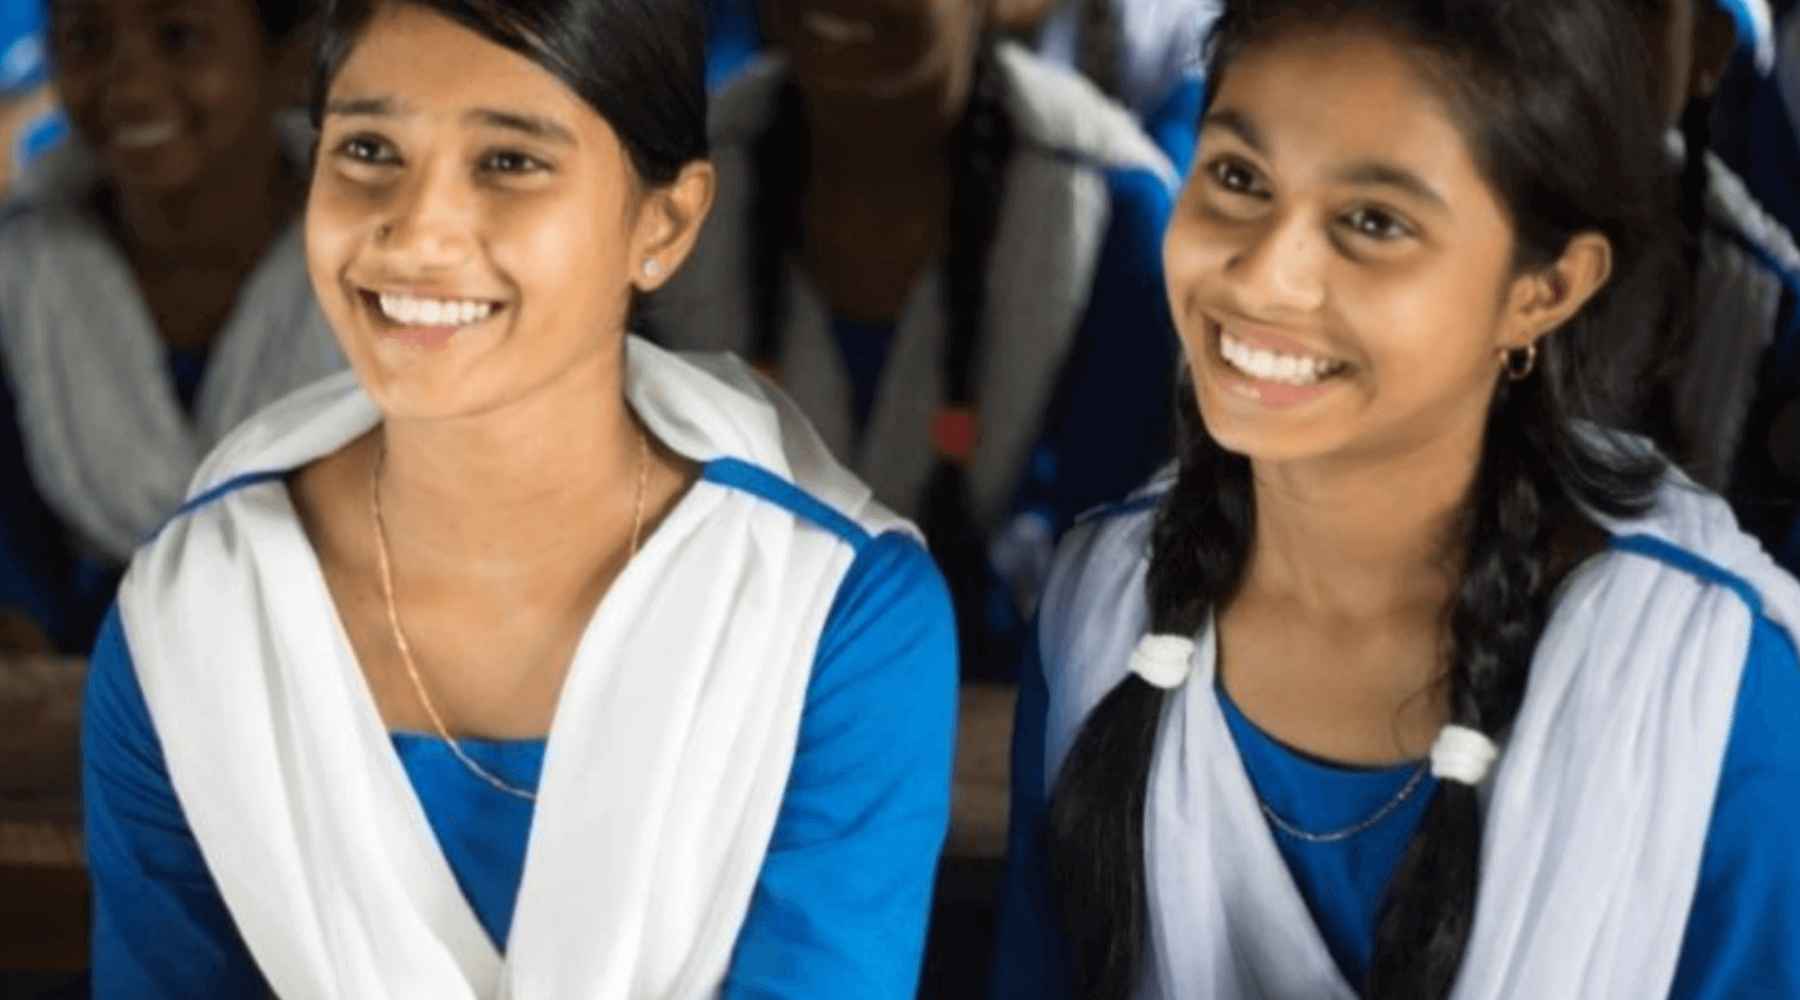 Two girls from Bangladesh’s Room to Read program are smiling and wearing the same blue dress.